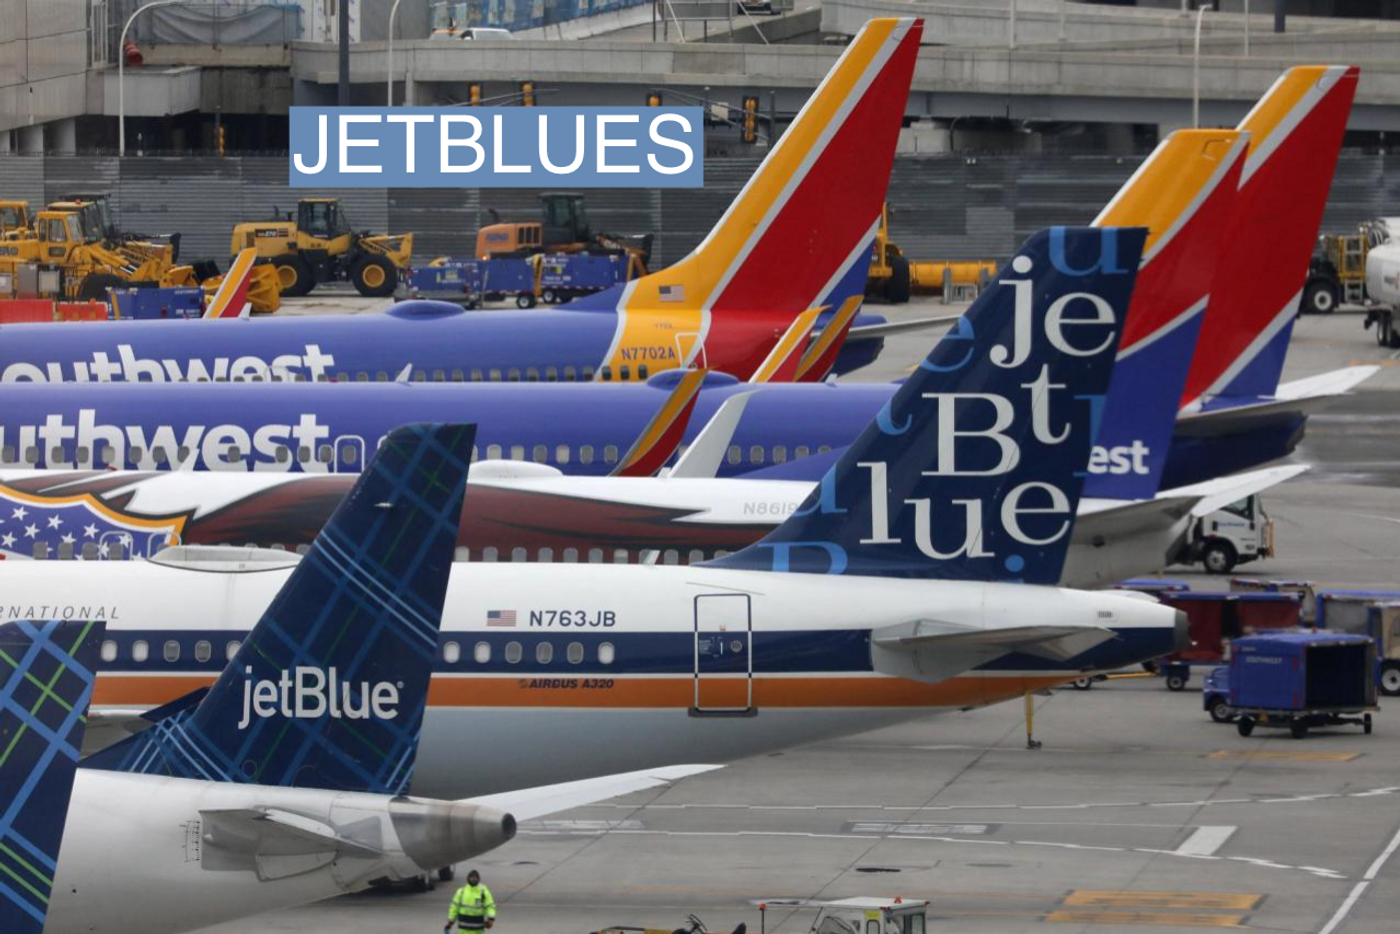 JetBlue and Southwest Airlines planes are parked at the LaGuardia Airport in New York City, U.S. March 4, 2023.